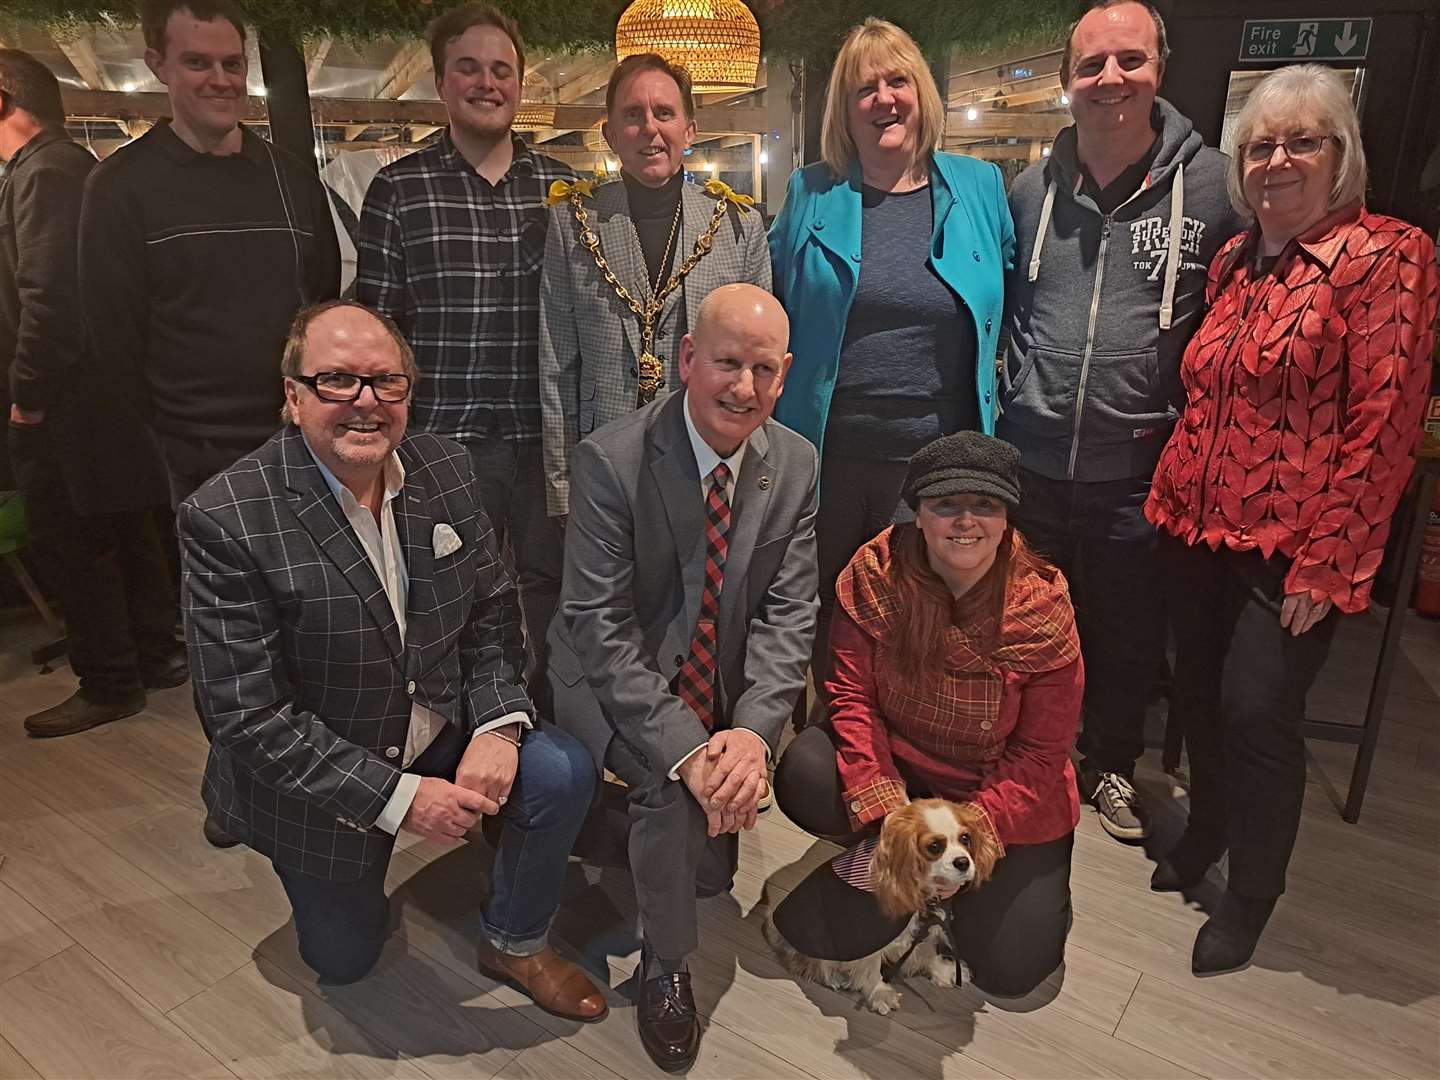 The River Festival team with the Mayor: back row from left: Kevin Arrowsmith, Stuart Older, Angela Vincent, Mike Whitcombe, Carol Vizzard, Front Row: Marcus Niblett, Dave Naghi, Clairey Suzanne and mascot Peppermint the dog